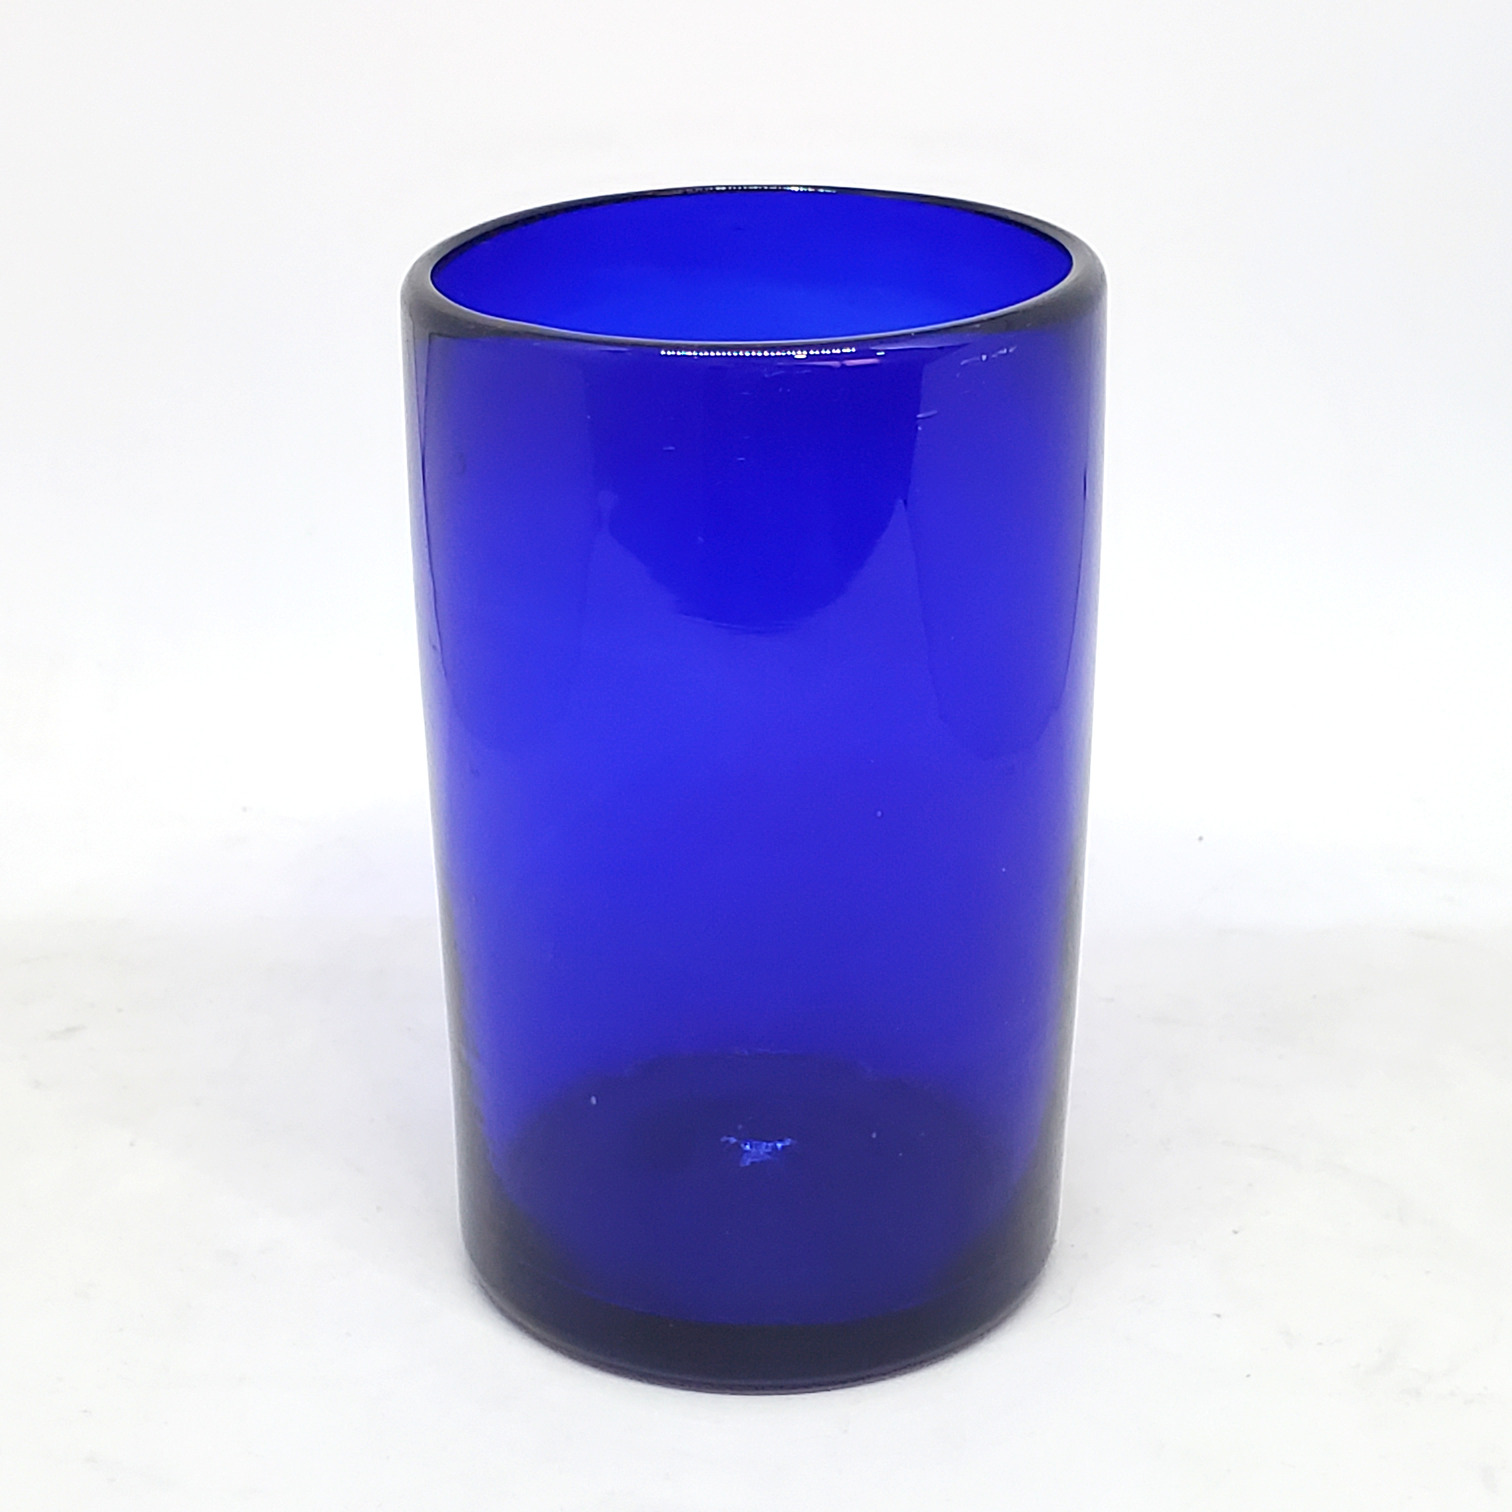 MEXICAN GLASSWARE / Solid Cobalt Blue 14 oz Drinking Glasses (set of 6) / These handcrafted glasses deliver a classic touch to your favorite drink.